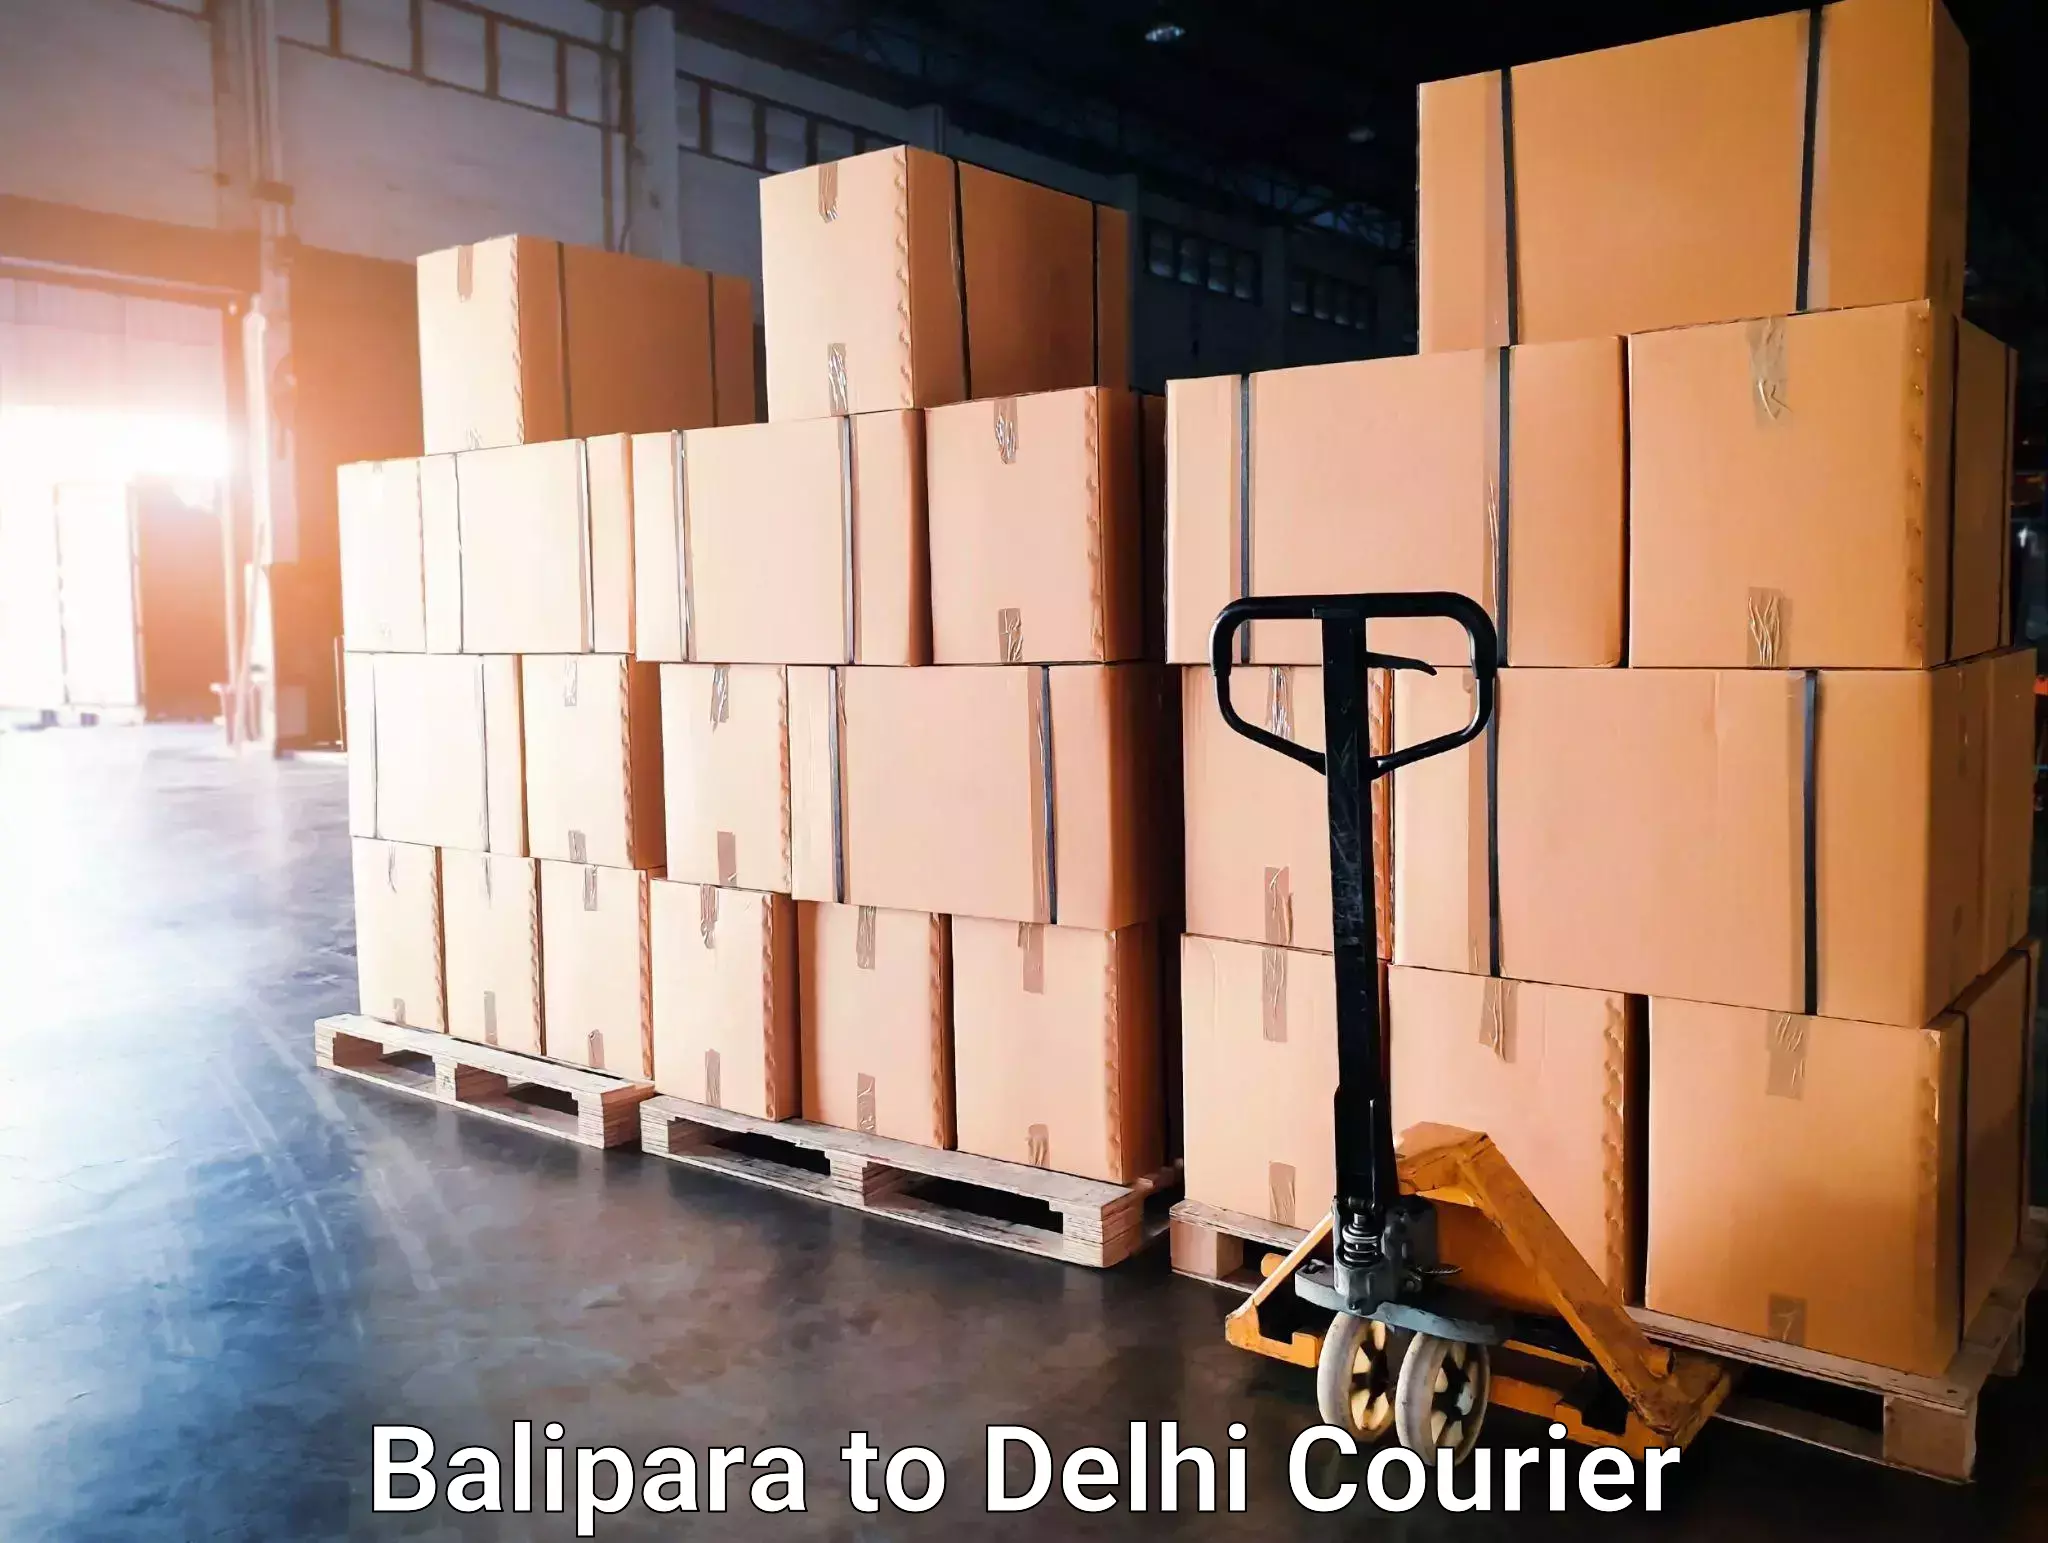 Speedy delivery service Balipara to NCR